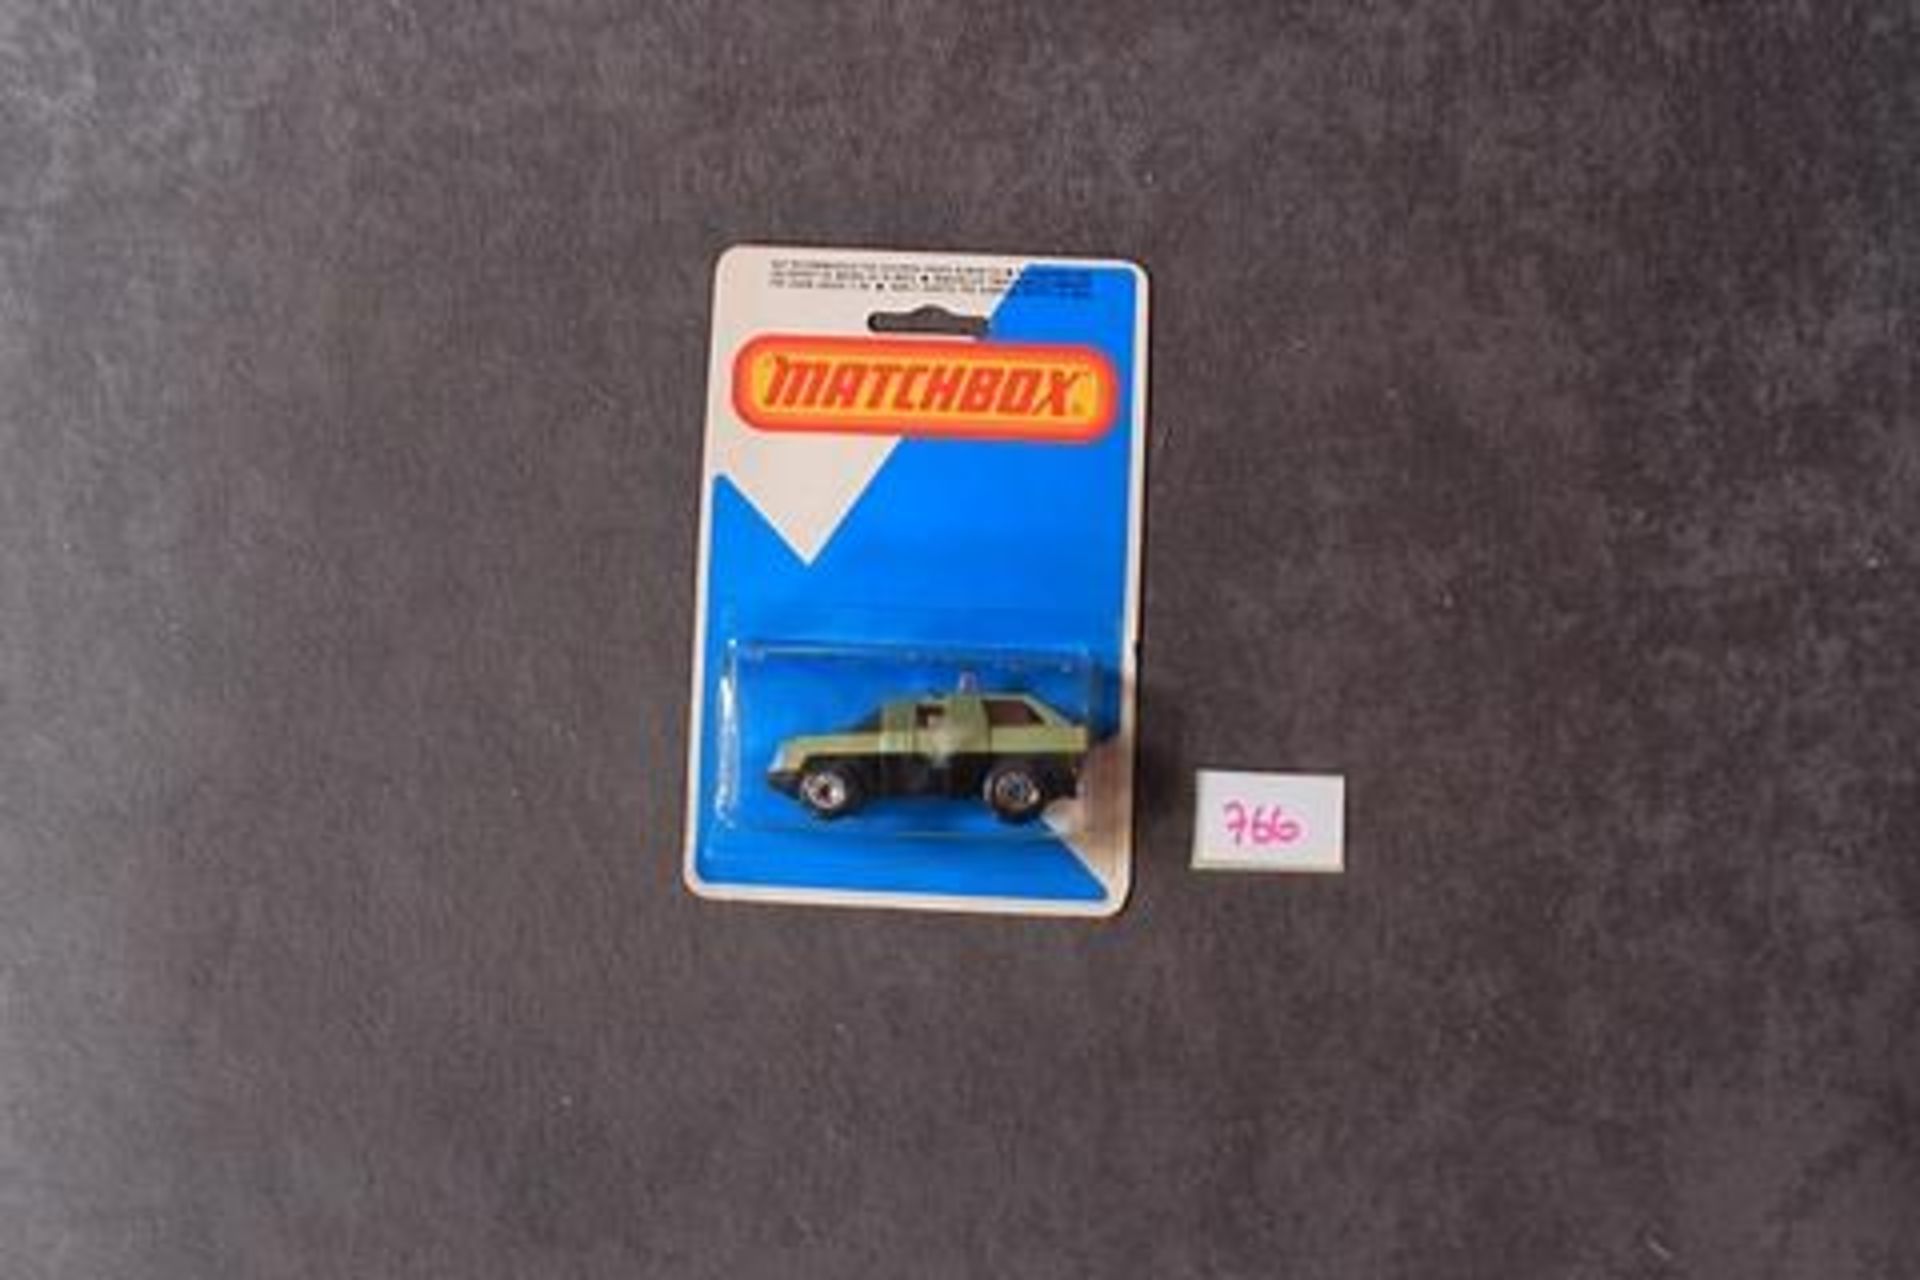 Matchbox Diecast Planet Scout On Original Card But Opened